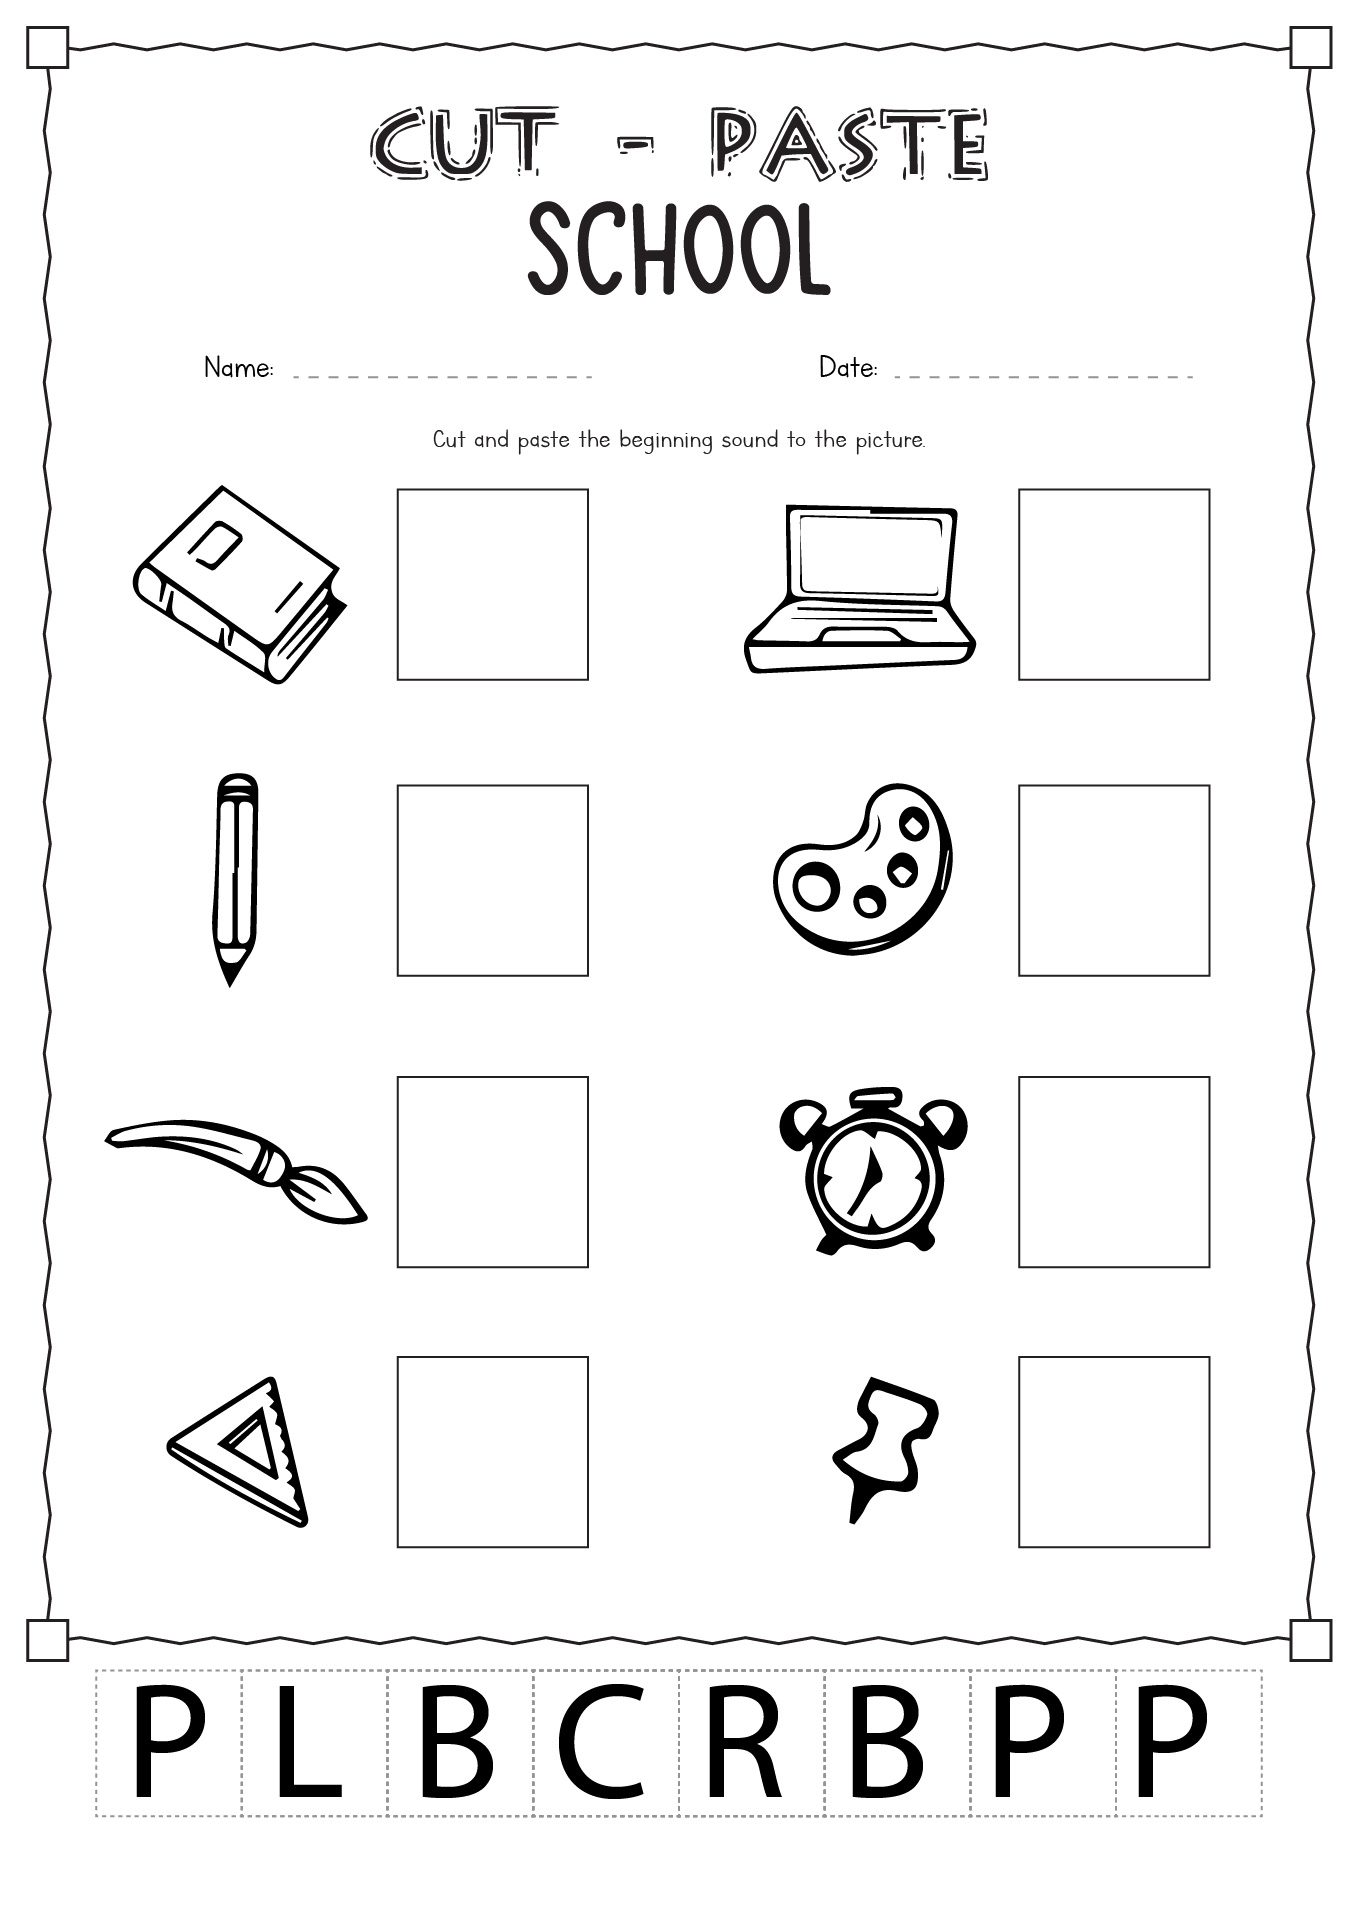 Free Printable Cut and Paste Worksheets